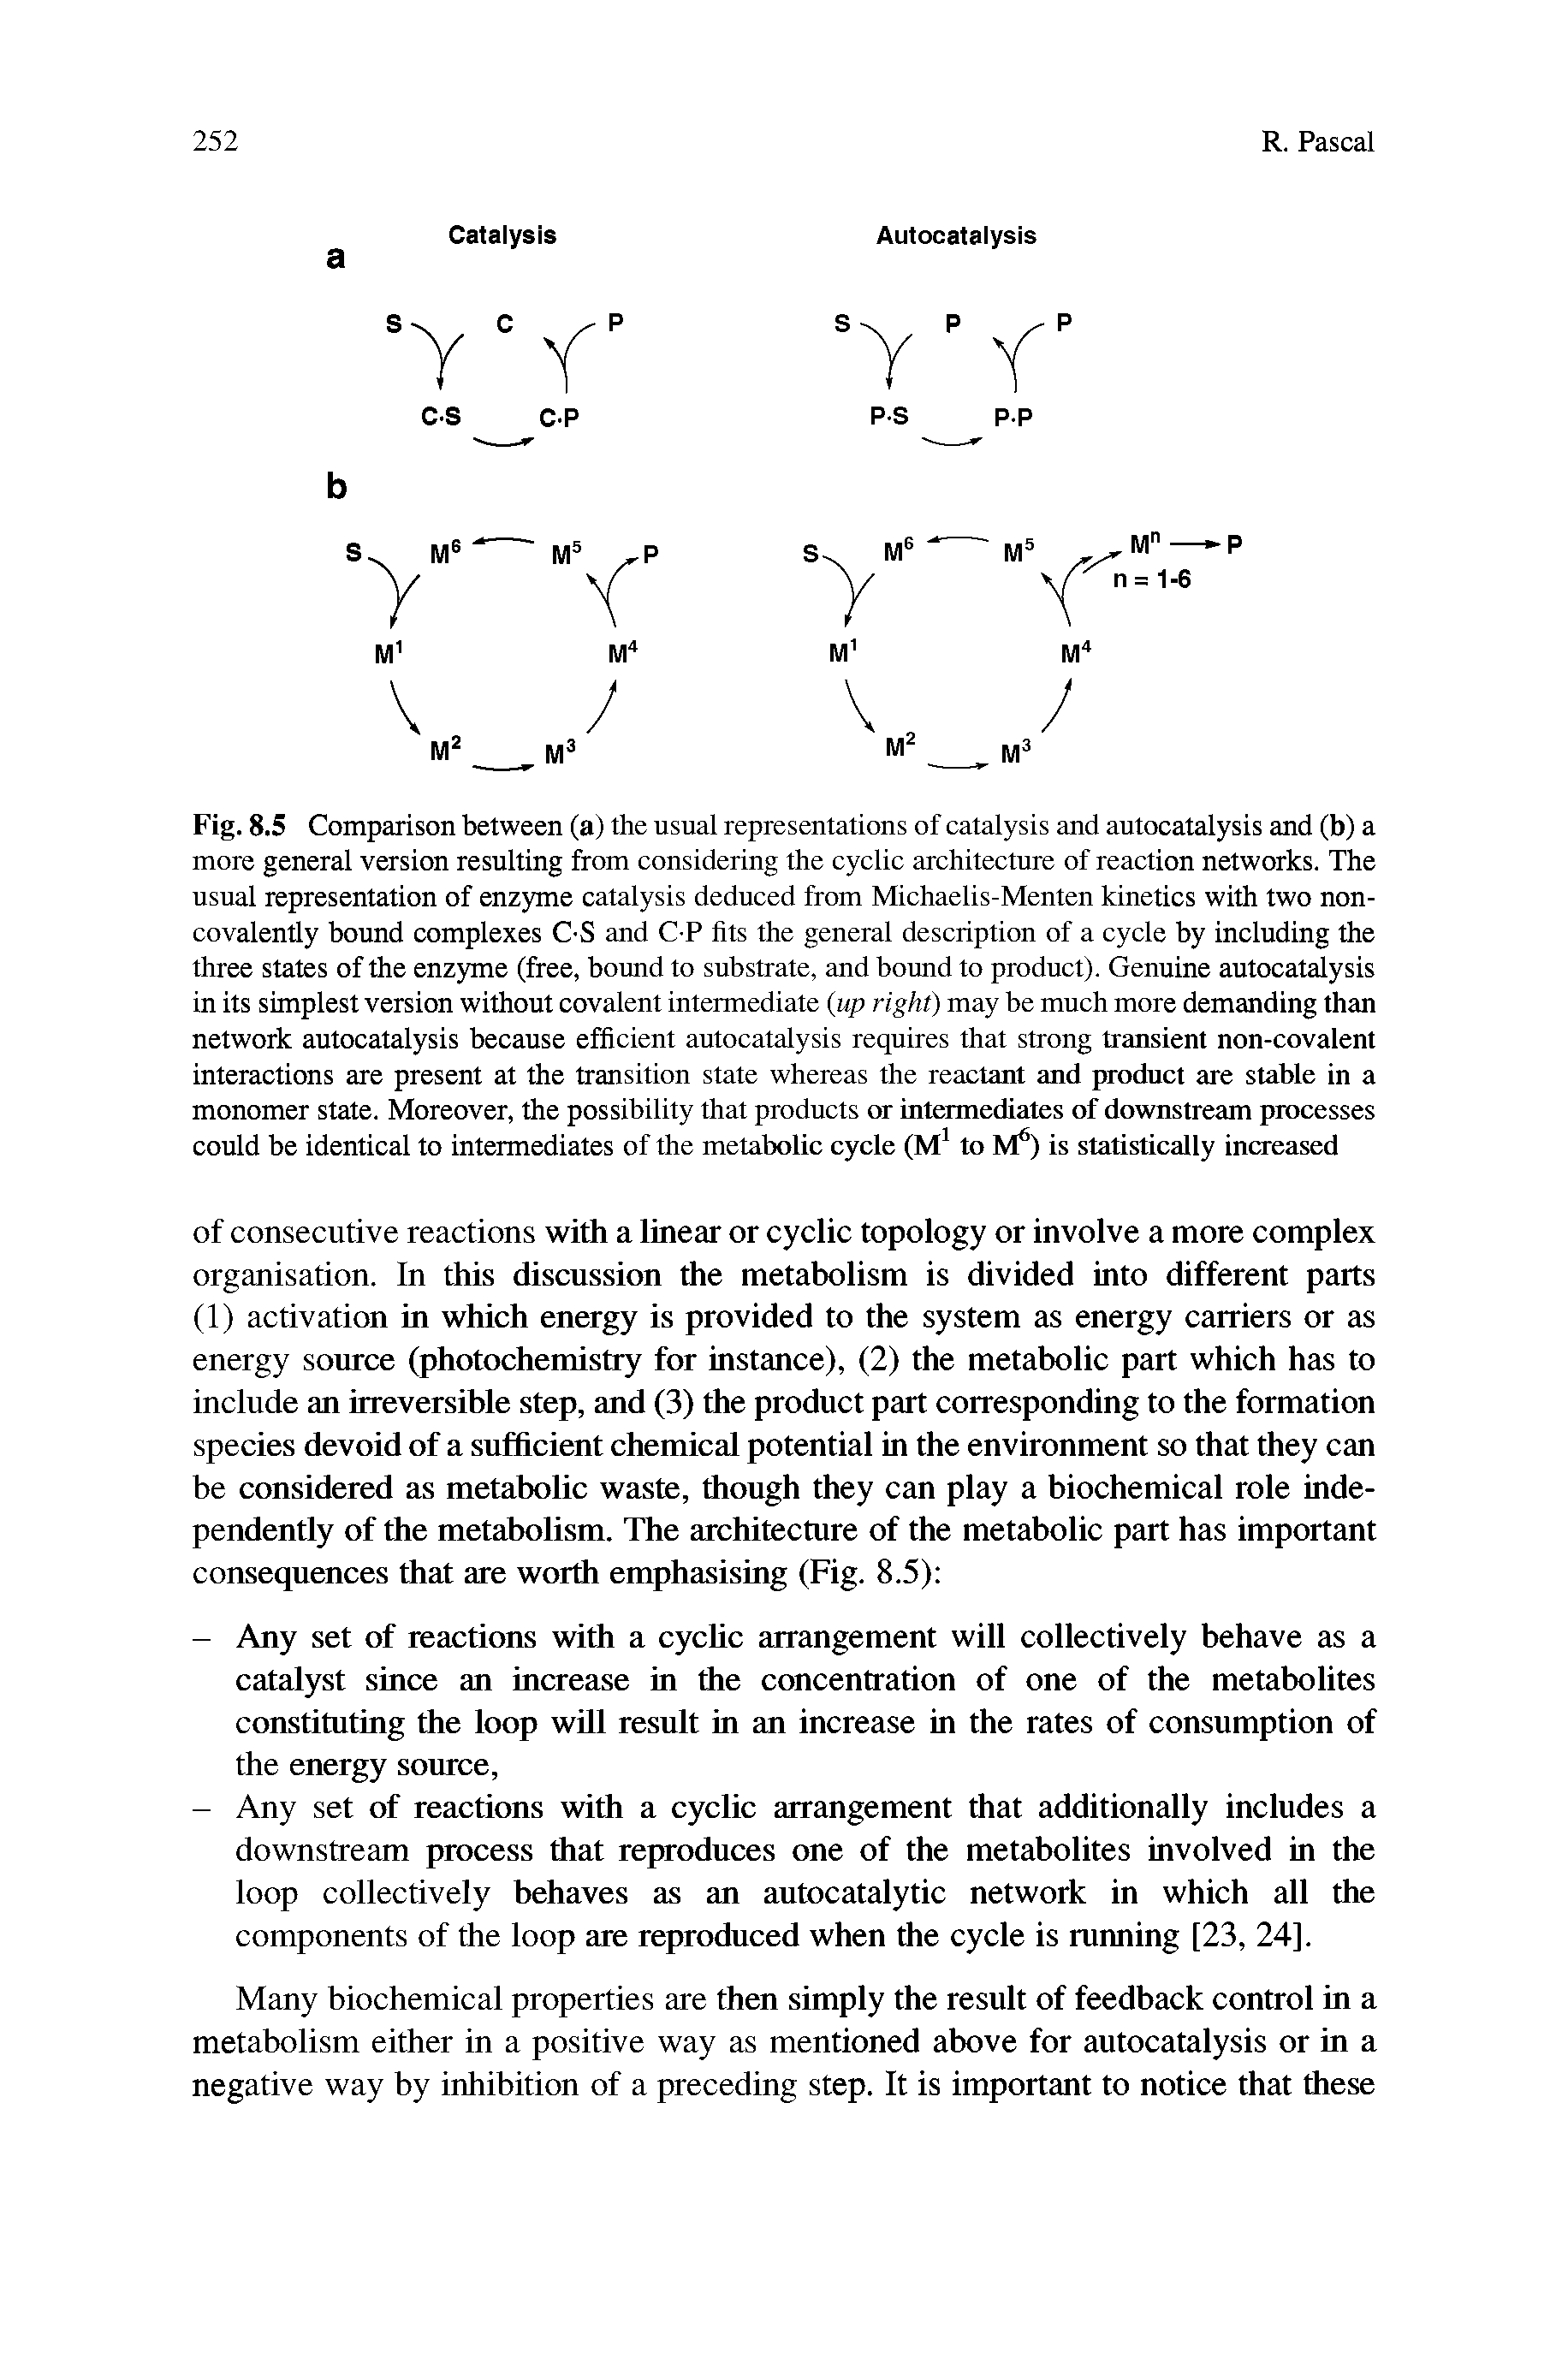 Fig. 8.5 Comparison between (a) the usual representations of catalysis and autocatalysis and (b) a more general version resulting from considering the cyclic architecture of reaction networks. The usual representation of enzyme catalysis deduced from Michaelis-Menten kinetics with two non-covalently bound complexes C S and C P fits the general description of a cycle by including the three states of the enzyme (free, bound to substrate, and bound to product). Genuine autocatalysis in its simplest version without covalent intermediate (up right) may be much more demanding than network autocatalysis because efficient autocatalysis requires that strong transient non-covalent interactions are present at the transition state whereas the reactant and product are stable in a monomer state. Moreover, the possibility that products or intermediates of downstream processes could be identical to intermediates of the metabolic cycle (M to M ) is statistically intaeased...